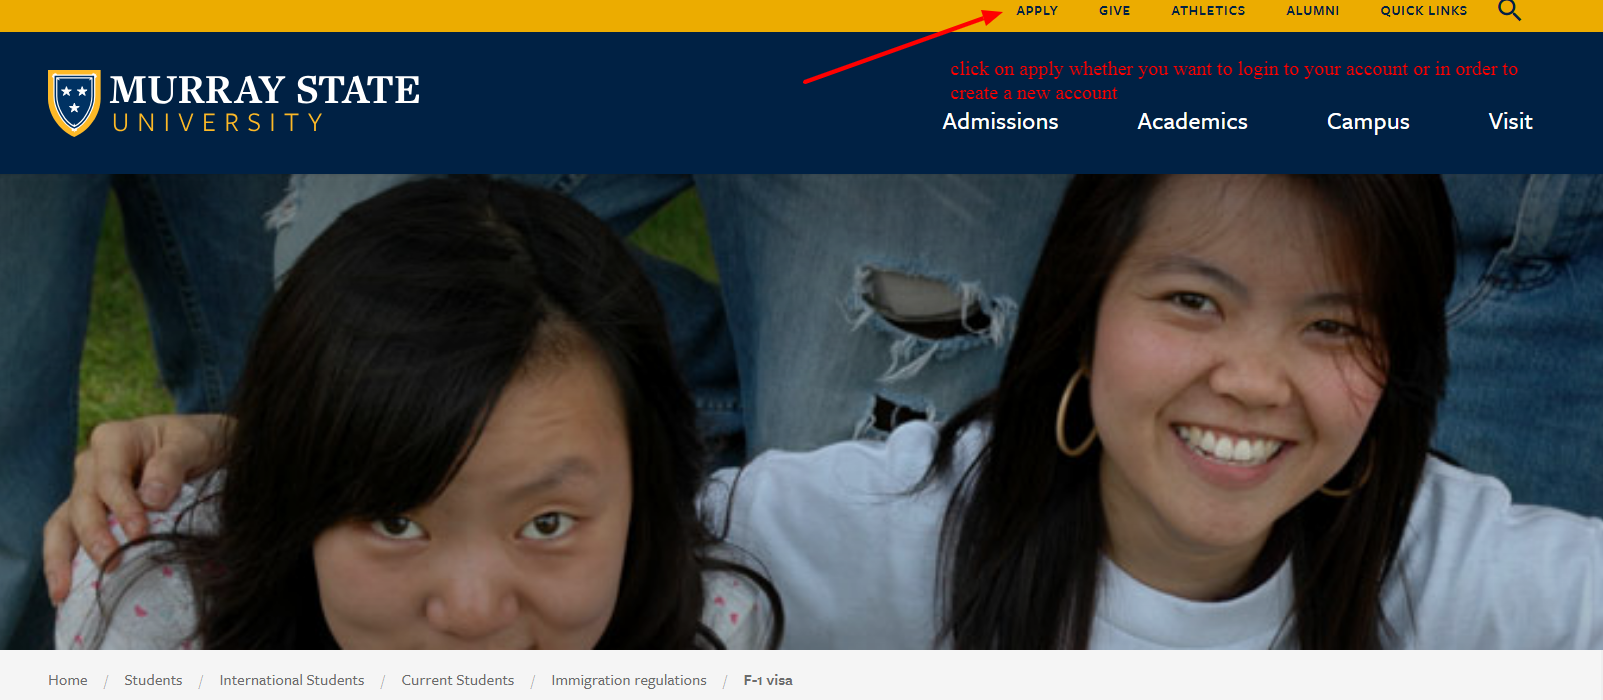 log in to your murray state visaxx rewards card account 1